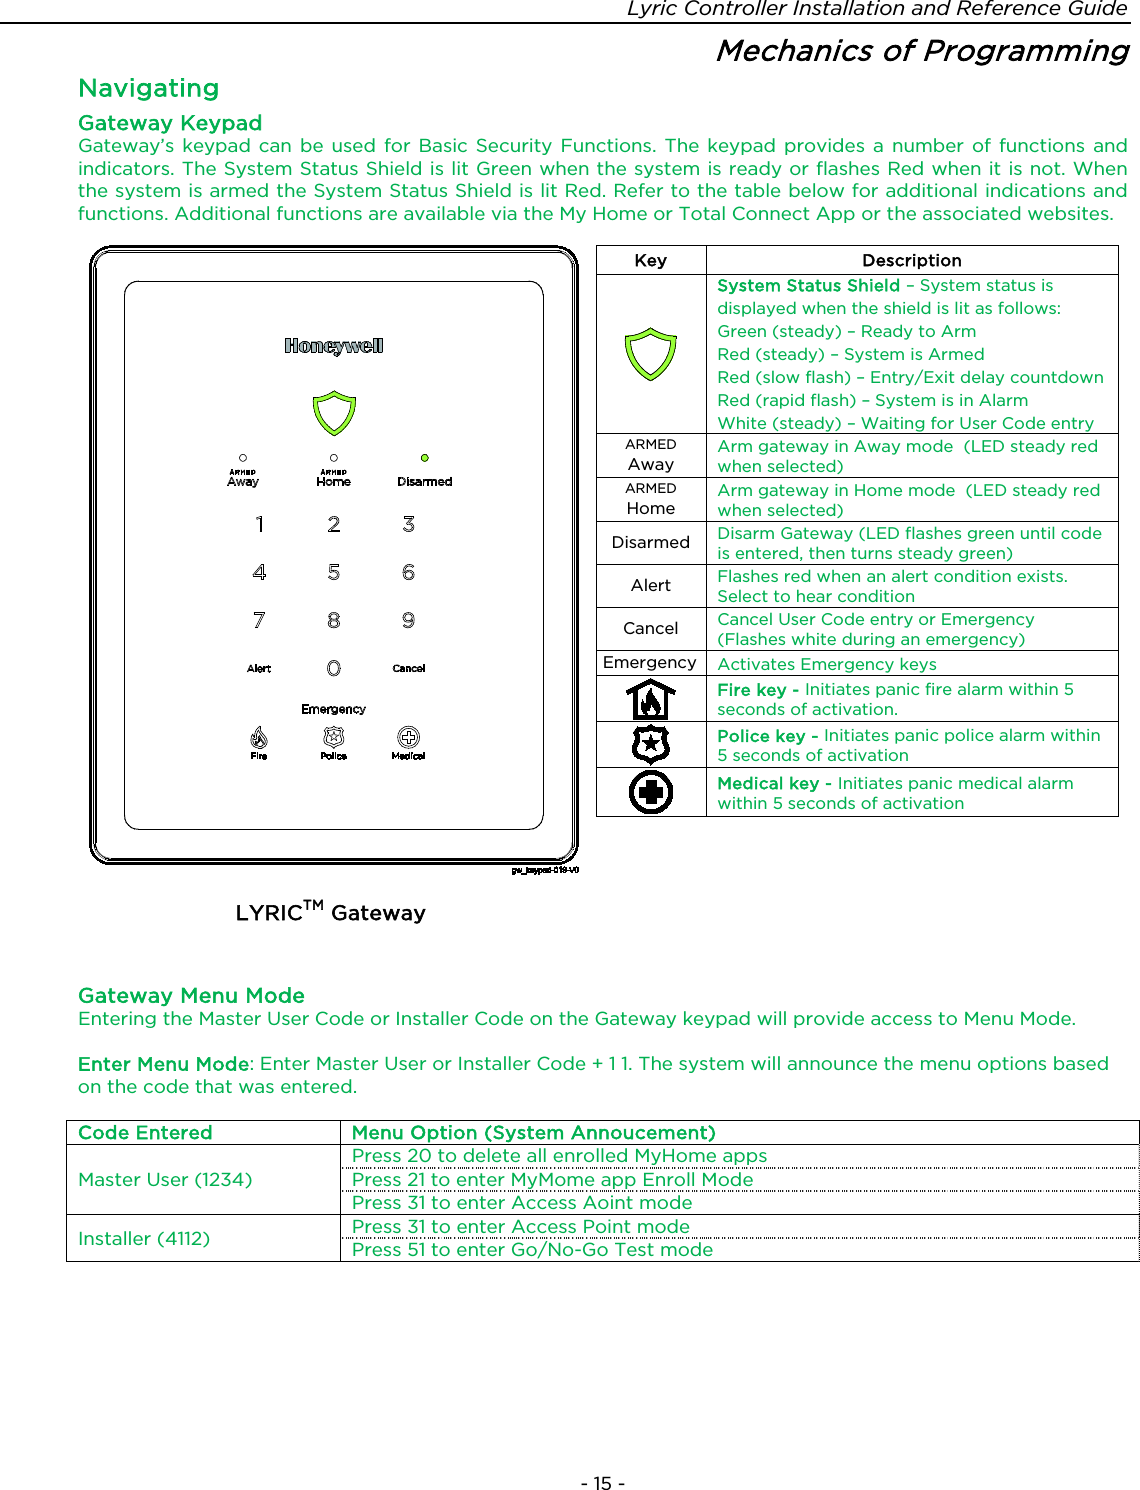 Lyric Controller Installation and Reference Guide  - 15 - Mechanics of Programming  Navigating   Gateway Keypad Gateway’s keypad can be used for Basic Security Functions. The keypad provides a number of functions and indicators. The System Status Shield is lit Green when the system is ready or flashes Red when it is not. When the system is armed the System Status Shield is lit Red. Refer to the table below for additional indications and functions. Additional functions are available via the My Home or Total Connect App or the associated websites.     LYRICTM Gateway Key Description  System Status Shield – System status is displayed when the shield is lit as follows: Green (steady) – Ready to Arm Red (steady) – System is Armed Red (slow flash) – Entry/Exit delay countdown Red (rapid flash) – System is in Alarm White (steady) – Waiting for User Code entry ARMED Away Arm gateway in Away mode  (LED steady red when selected) ARMED Home Arm gateway in Home mode  (LED steady red when selected) Disarmed Disarm Gateway (LED flashes green until code is entered, then turns steady green) Alert Flashes red when an alert condition exists. Select to hear condition Cancel Cancel User Code entry or Emergency (Flashes white during an emergency) Emergency Activates Emergency keys  Fire key - Initiates panic fire alarm within 5 seconds of activation.  Police key - Initiates panic police alarm within 5 seconds of activation  Medical key - Initiates panic medical alarm within 5 seconds of activation        Gateway Menu Mode Entering the Master User Code or Installer Code on the Gateway keypad will provide access to Menu Mode.    Enter Menu Mode: Enter Master User or Installer Code + 1 1. The system will announce the menu options based on the code that was entered.  Code Entered Menu Option (System Annoucement) Master User (1234) Press 20 to delete all enrolled MyHome apps Press 21 to enter MyMome app Enroll Mode Press 31 to enter Access Aoint mode Installer (4112) Press 31 to enter Access Point mode Press 51 to enter Go/No-Go Test mode    